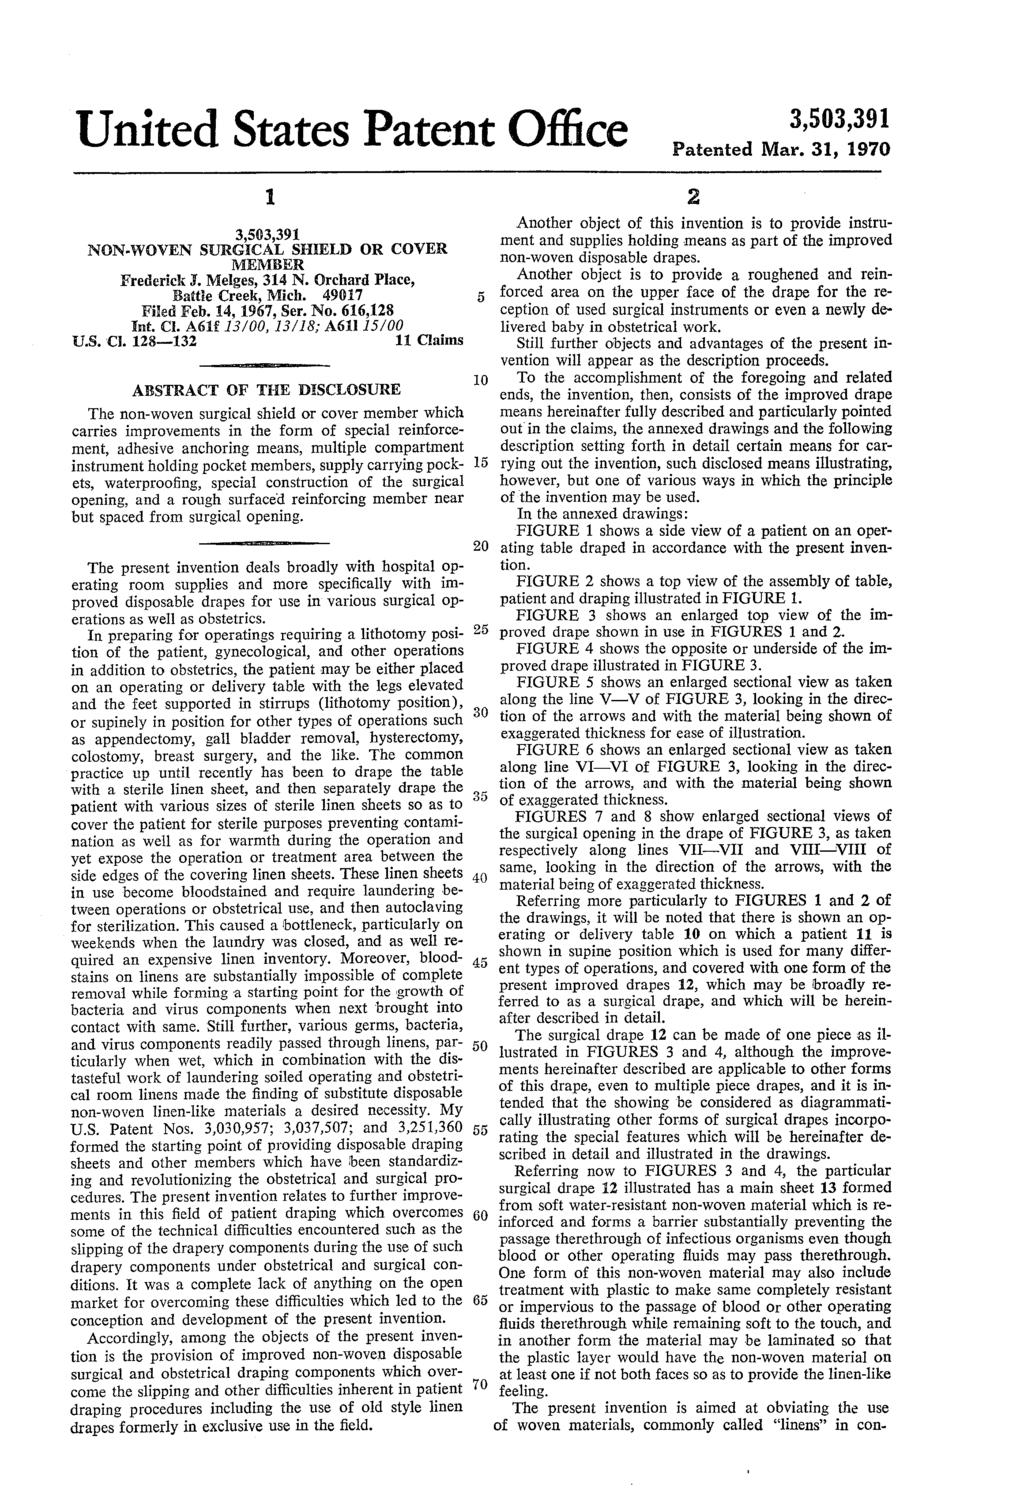 United States Patent Office Patented Mar. 31, 1970 1. NON.WOVEN SURGECAL SHIELD OR COVER MEMBER Frederick J. Melges, 314 N. Orchard Place, Battle Creek, Mich. 4907 Filed Feb. 14, 1967, Ser. No.